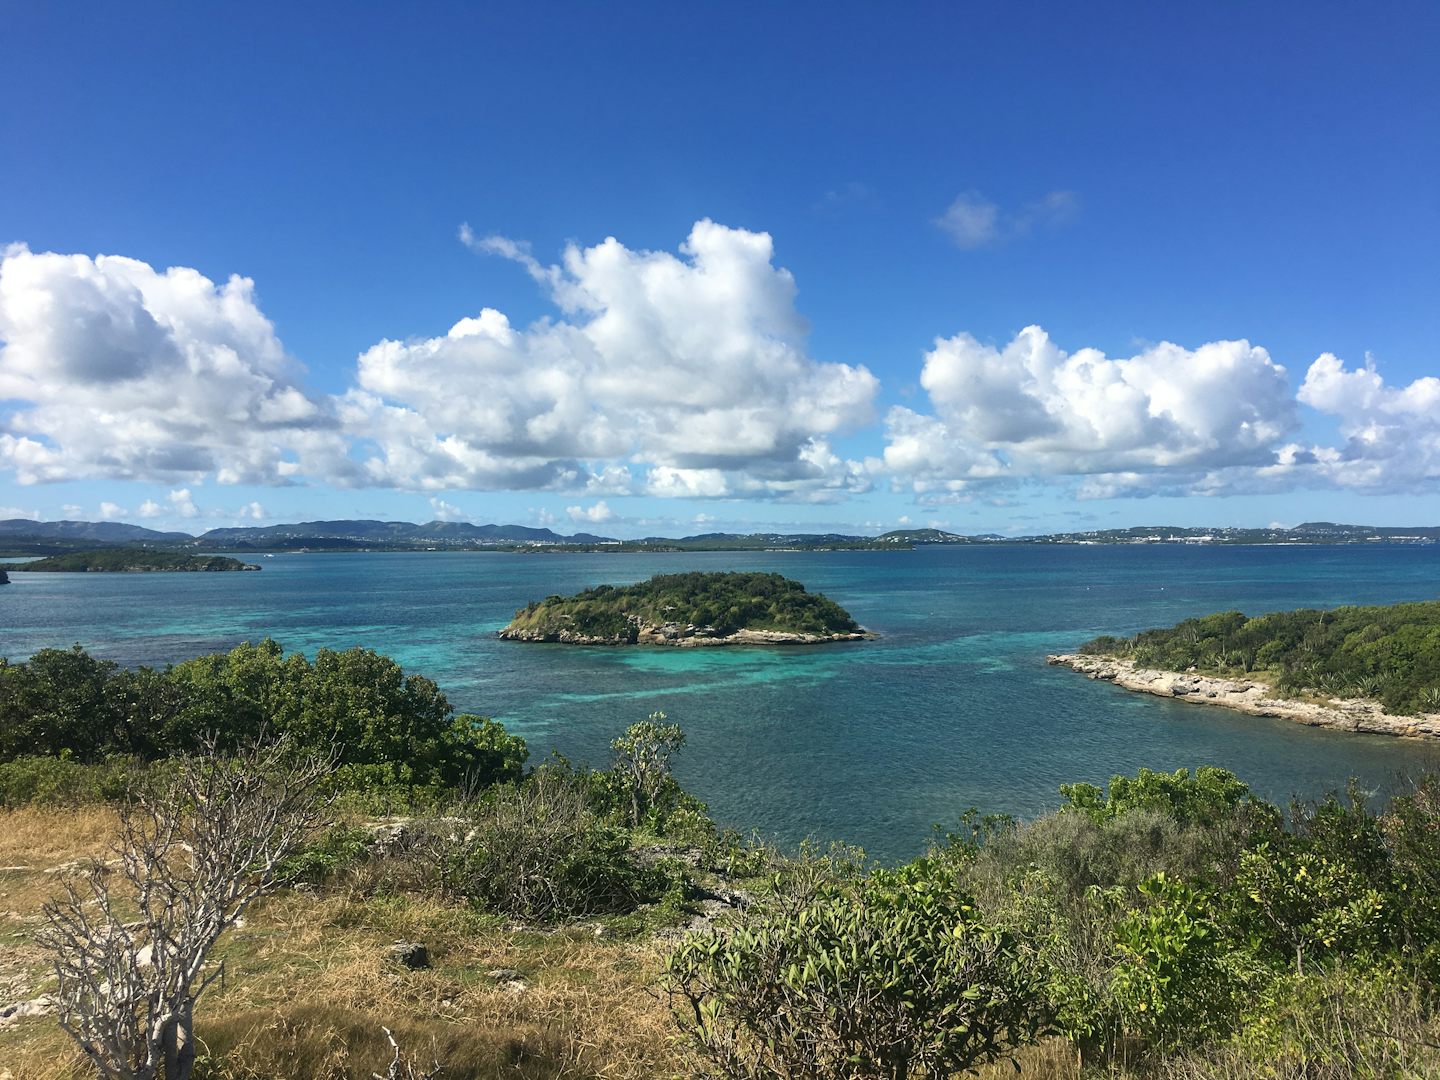 St. Phillips, Antigua, picture of the view from Bird Island while on the Kayak and Snorkel Ecoadventure excursion